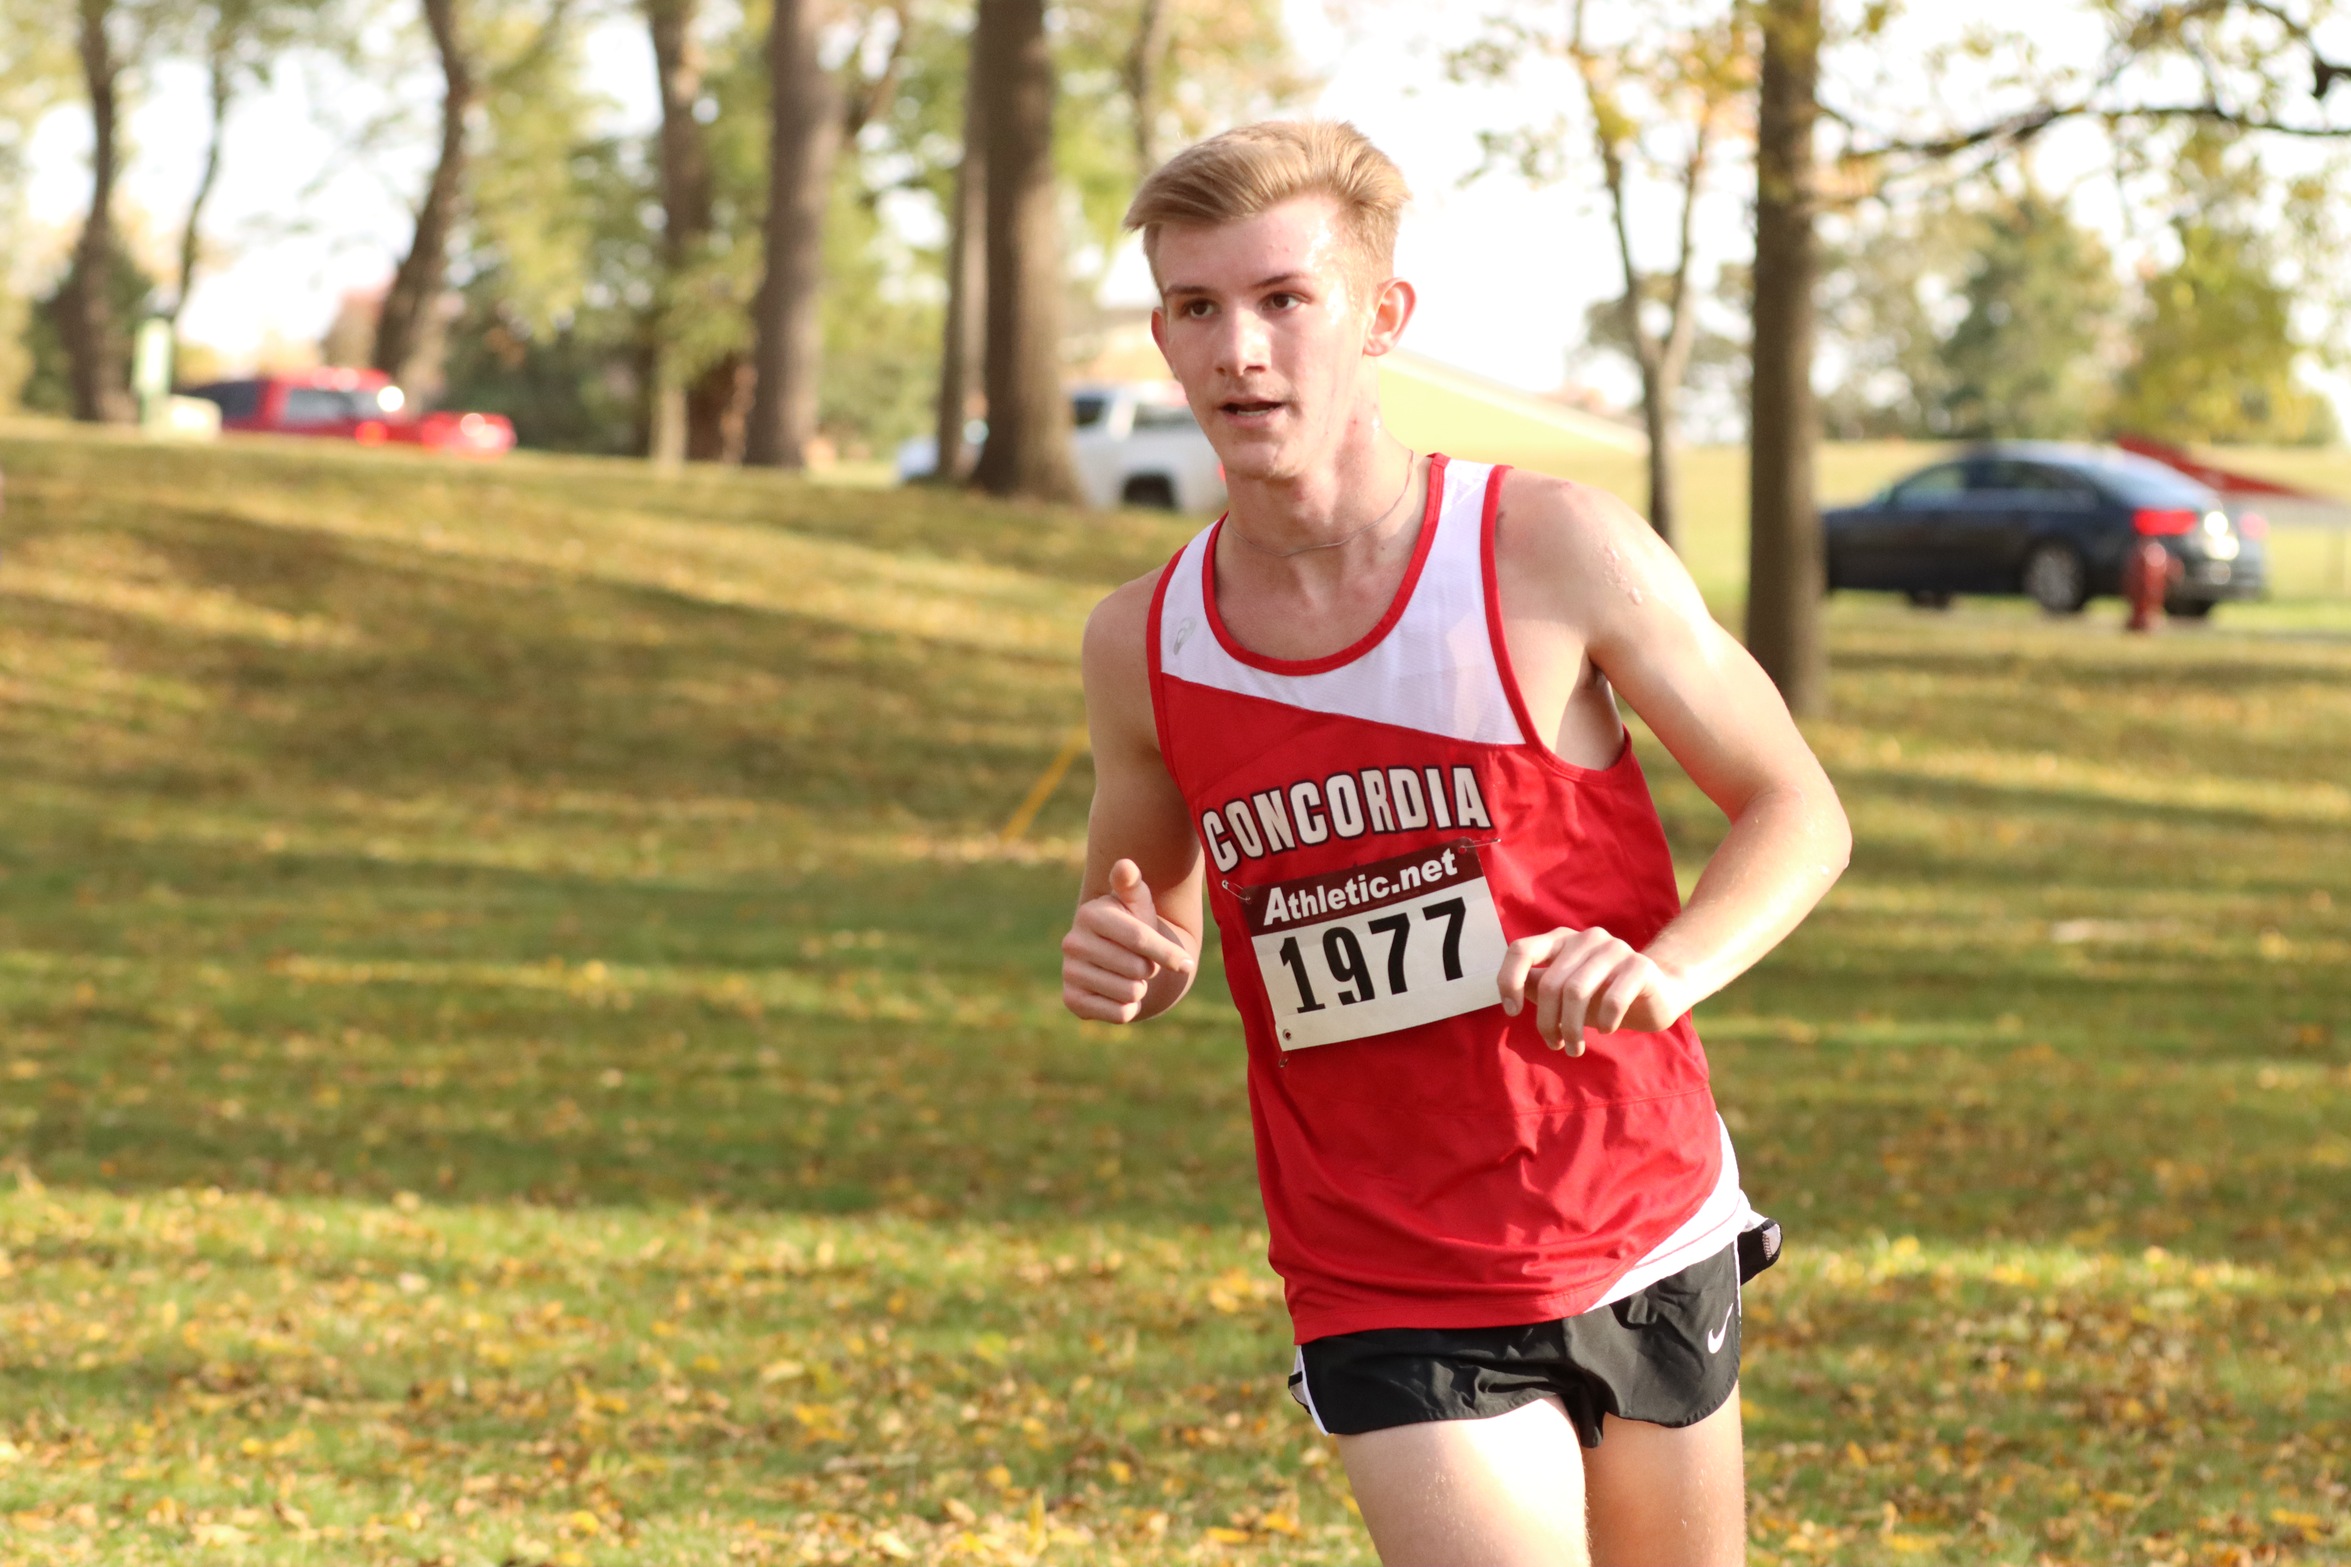 Men's Cross Country see's Eising, Sanchez PR's lead the way at Great Lakes Challenge